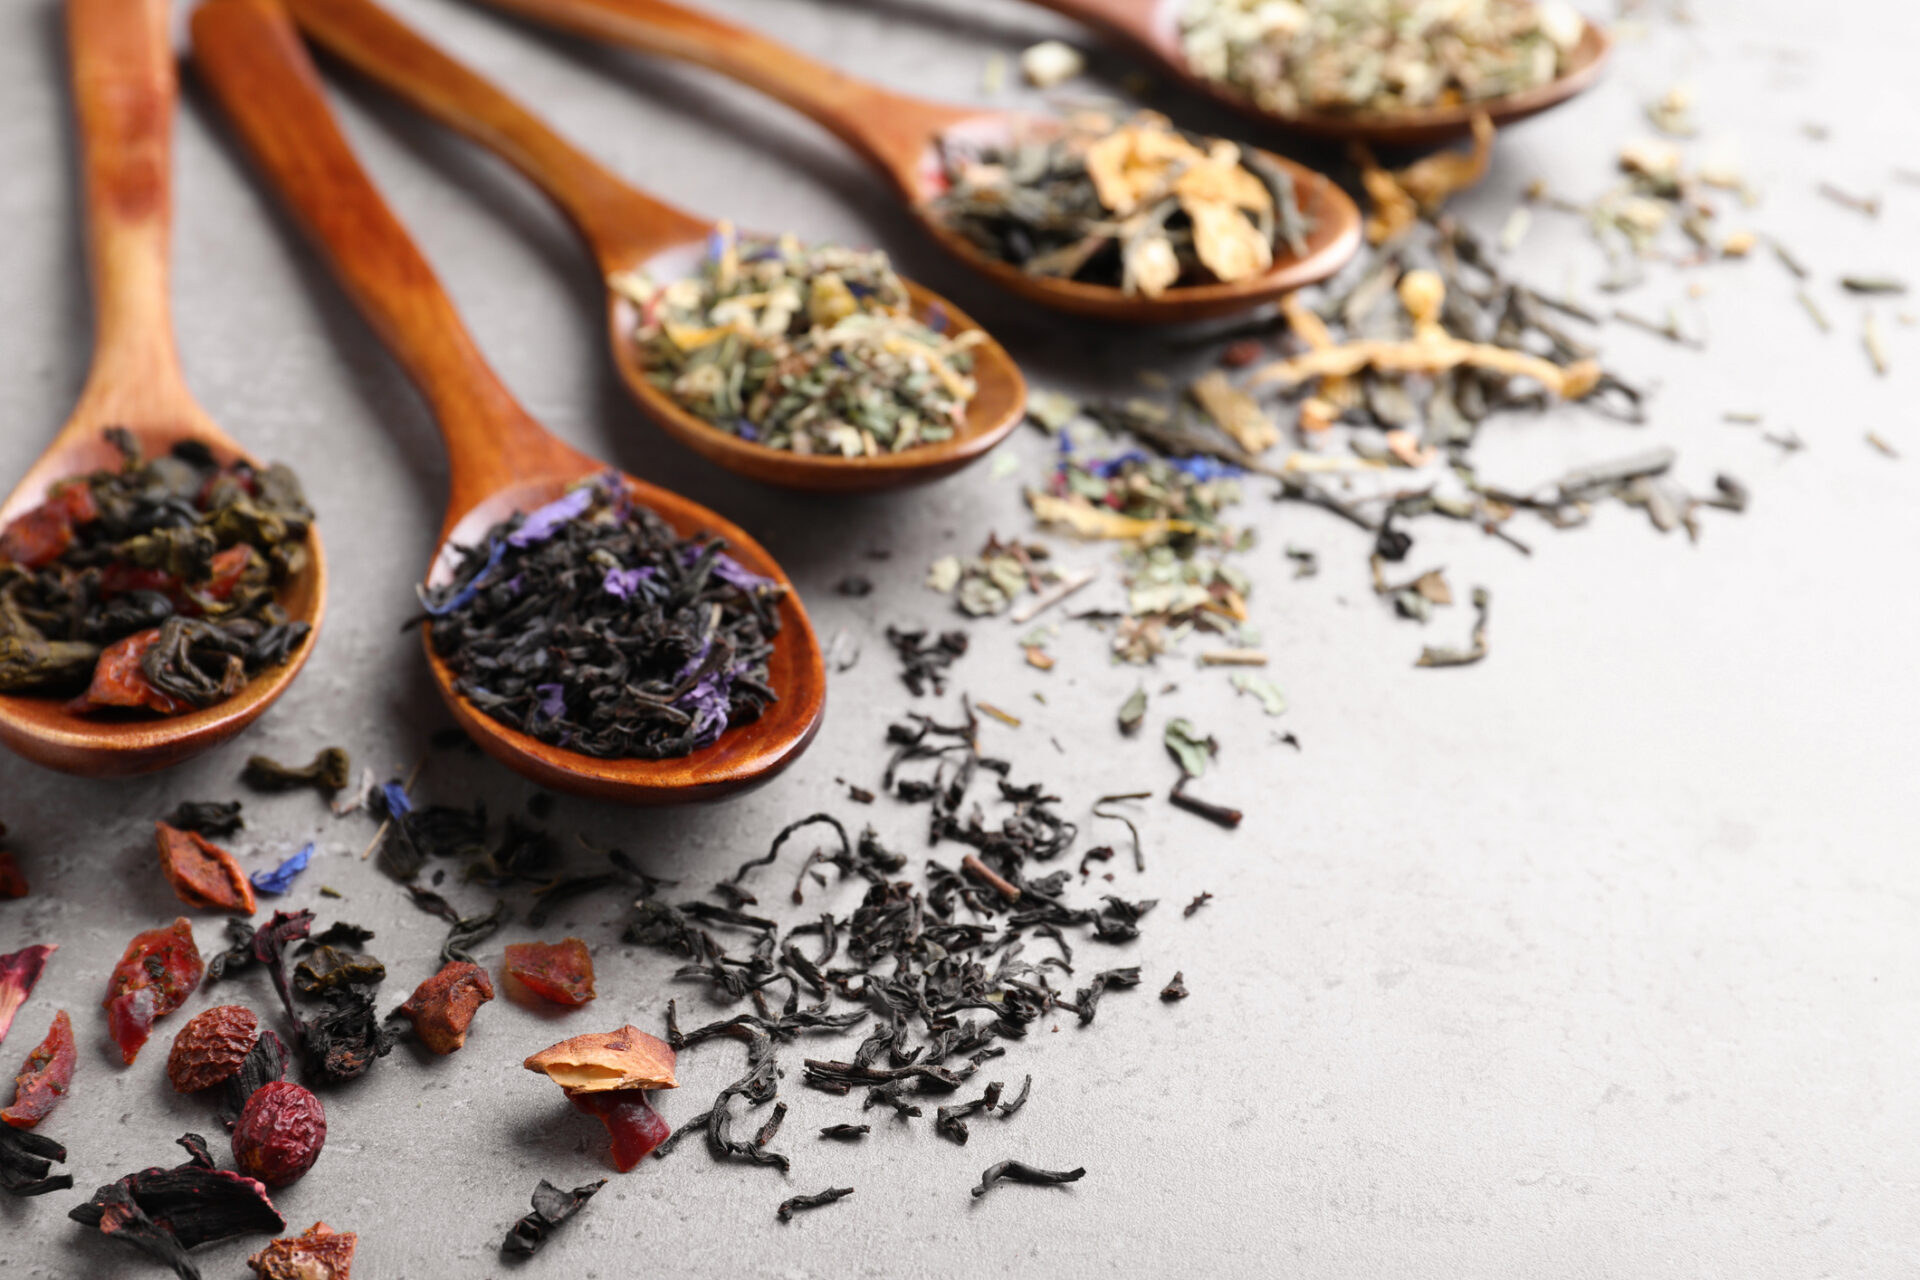 Read more about the article Enjoy & share teas, spices from around the world